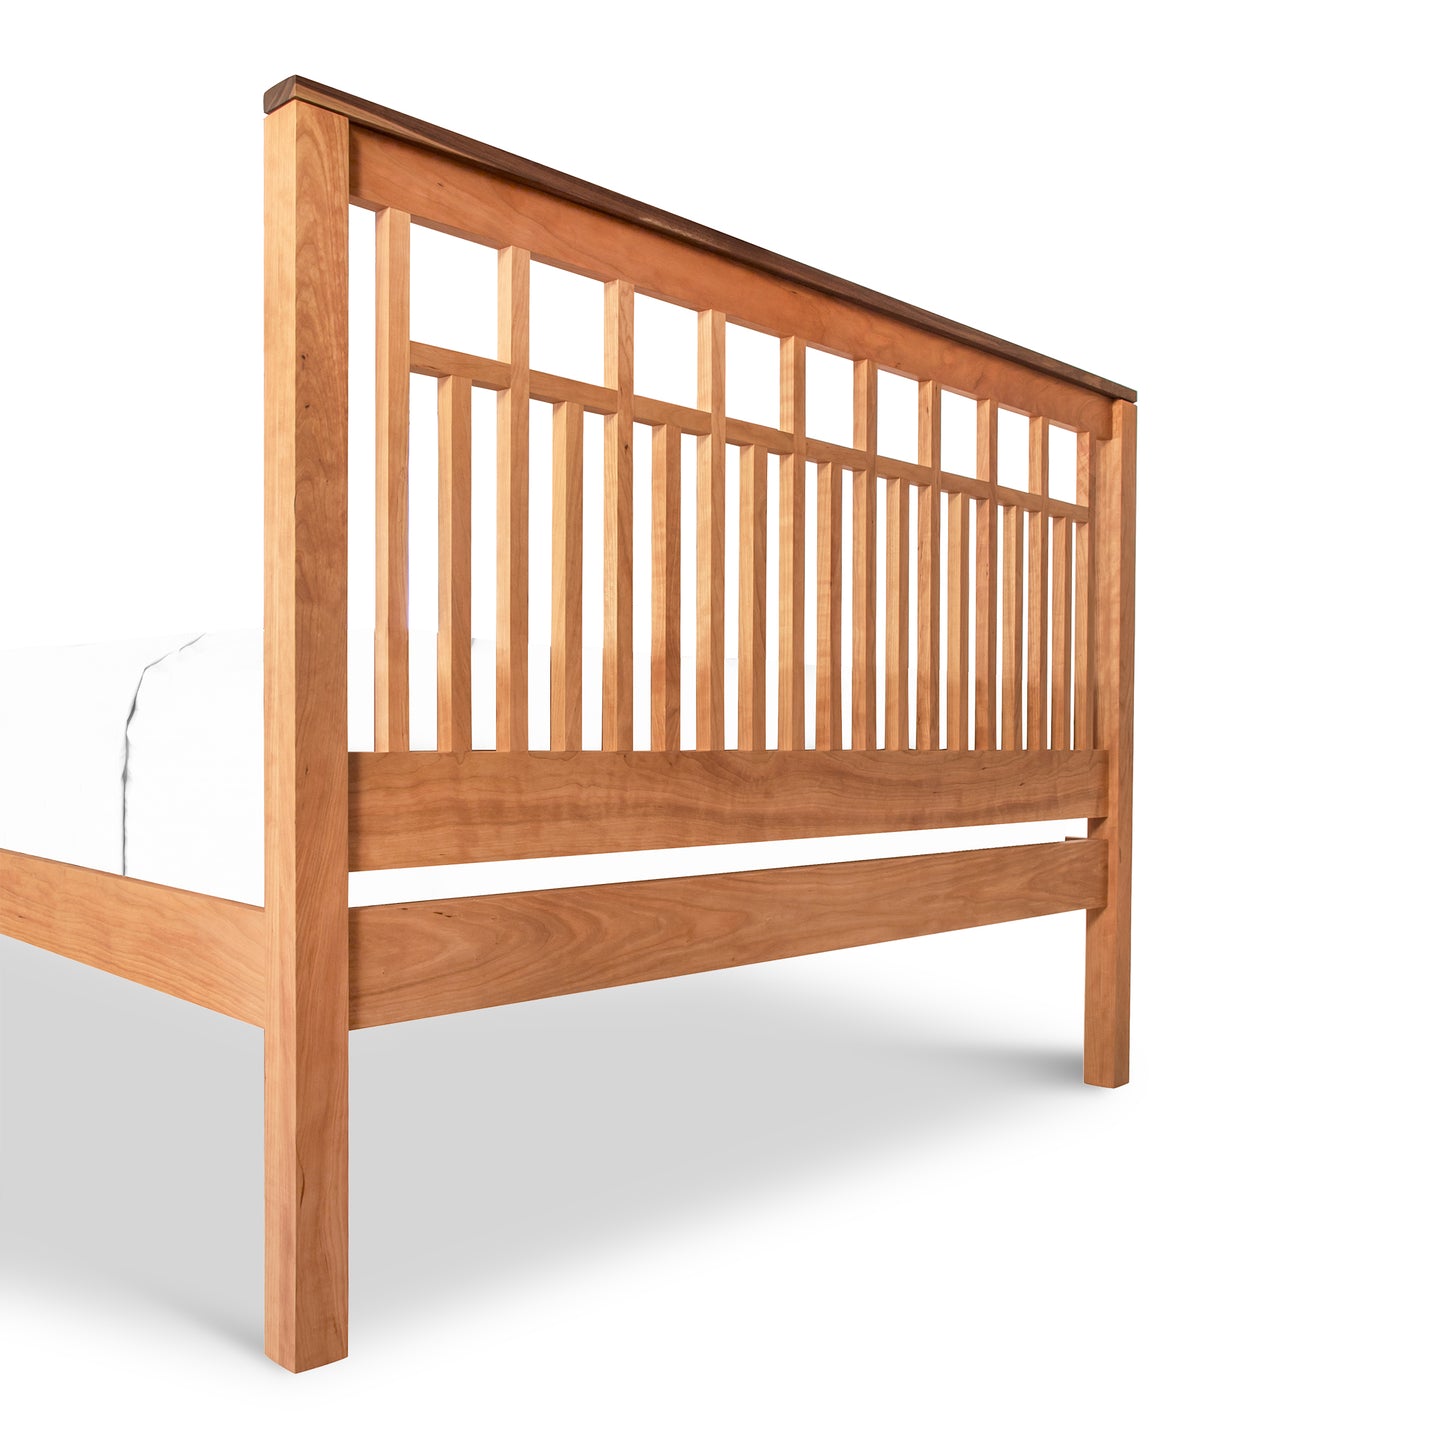 A Modern American Trellis Bed frame with high-end wooden slats, perfect for Vermont Furniture Designs bedroom furniture.